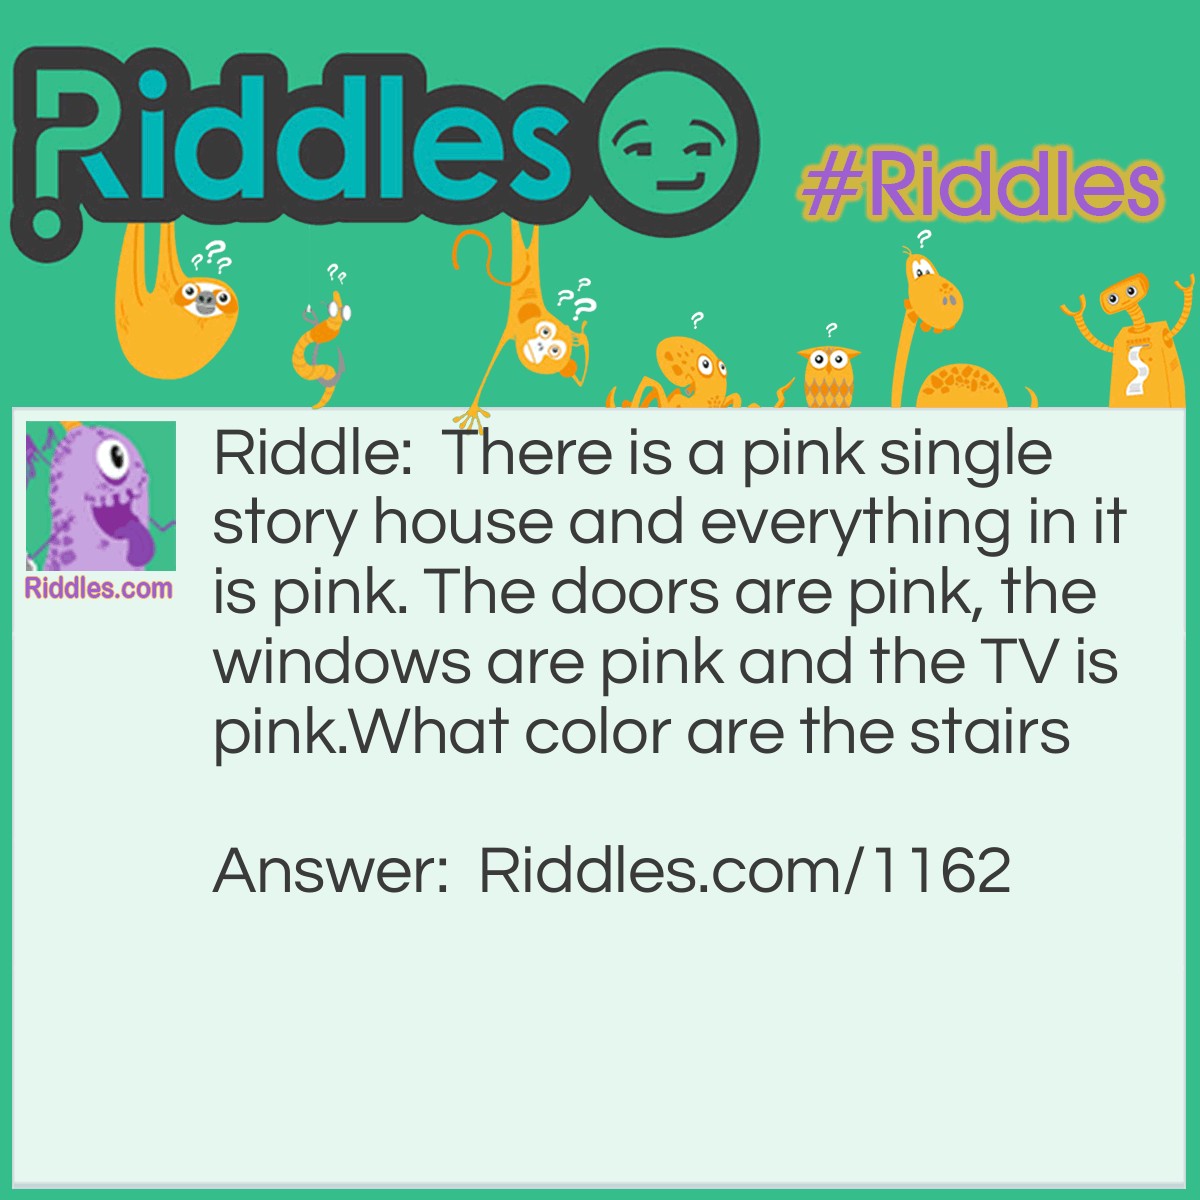 Riddle: There is a pink single story house and everything in it is pink. The doors are pink, the windows are pink and the TV is pink. What color are the stairs? Answer: There are no stairs in a single story house.